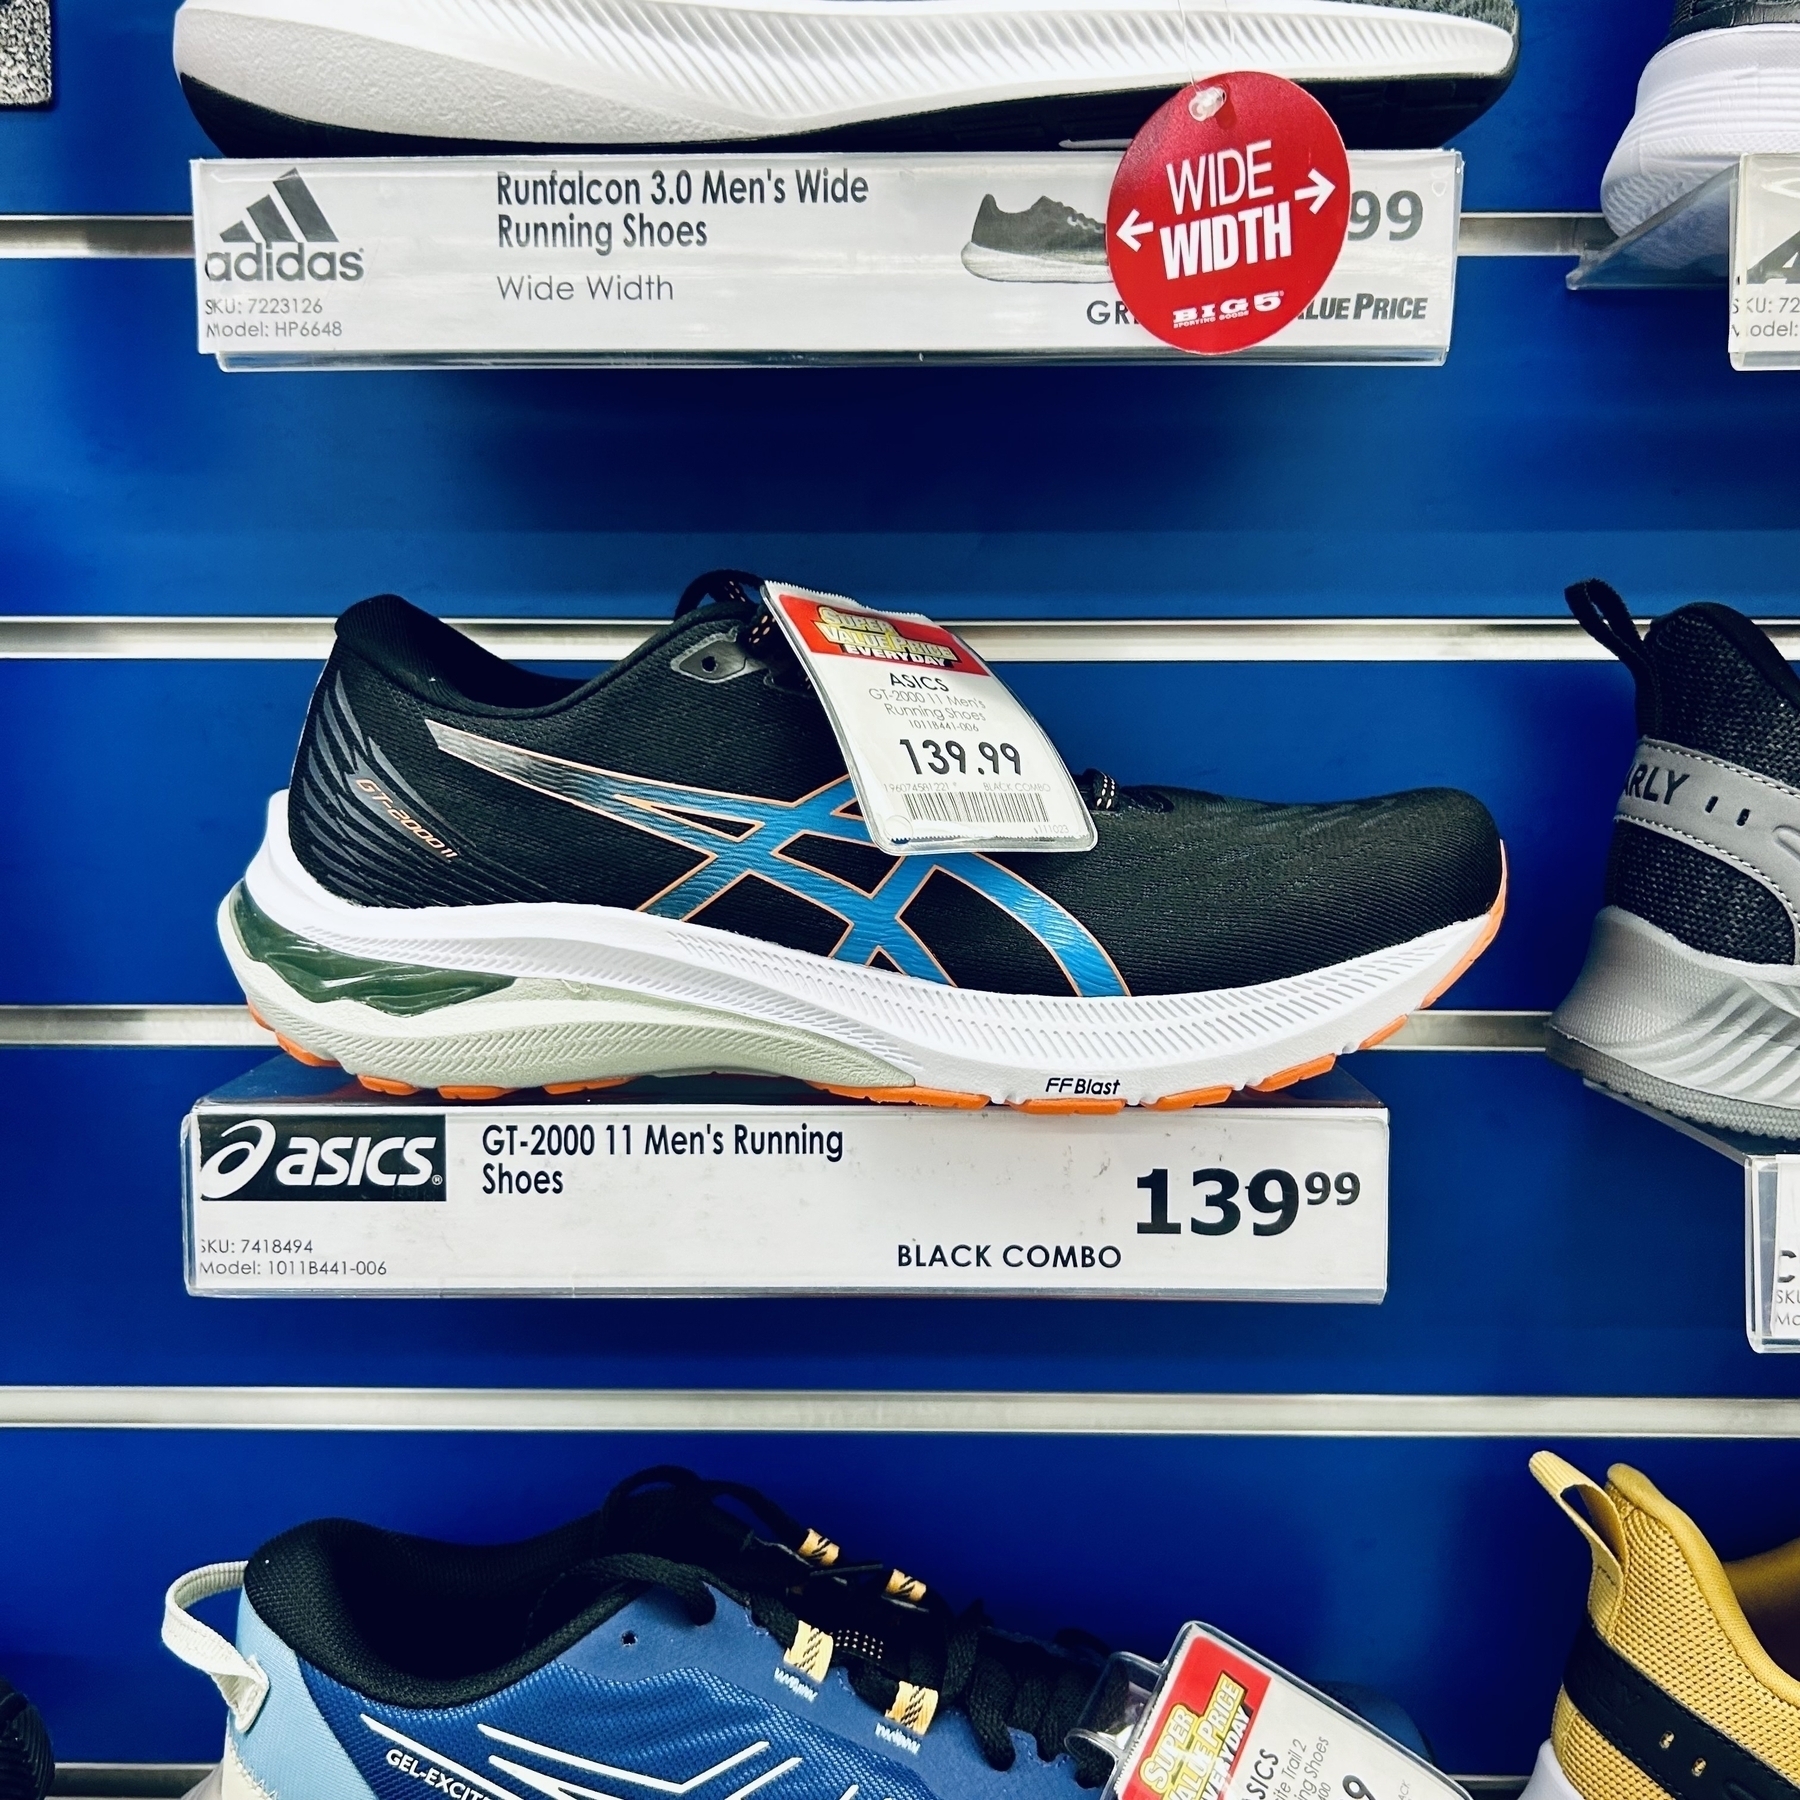 A running shoe on display at a store.